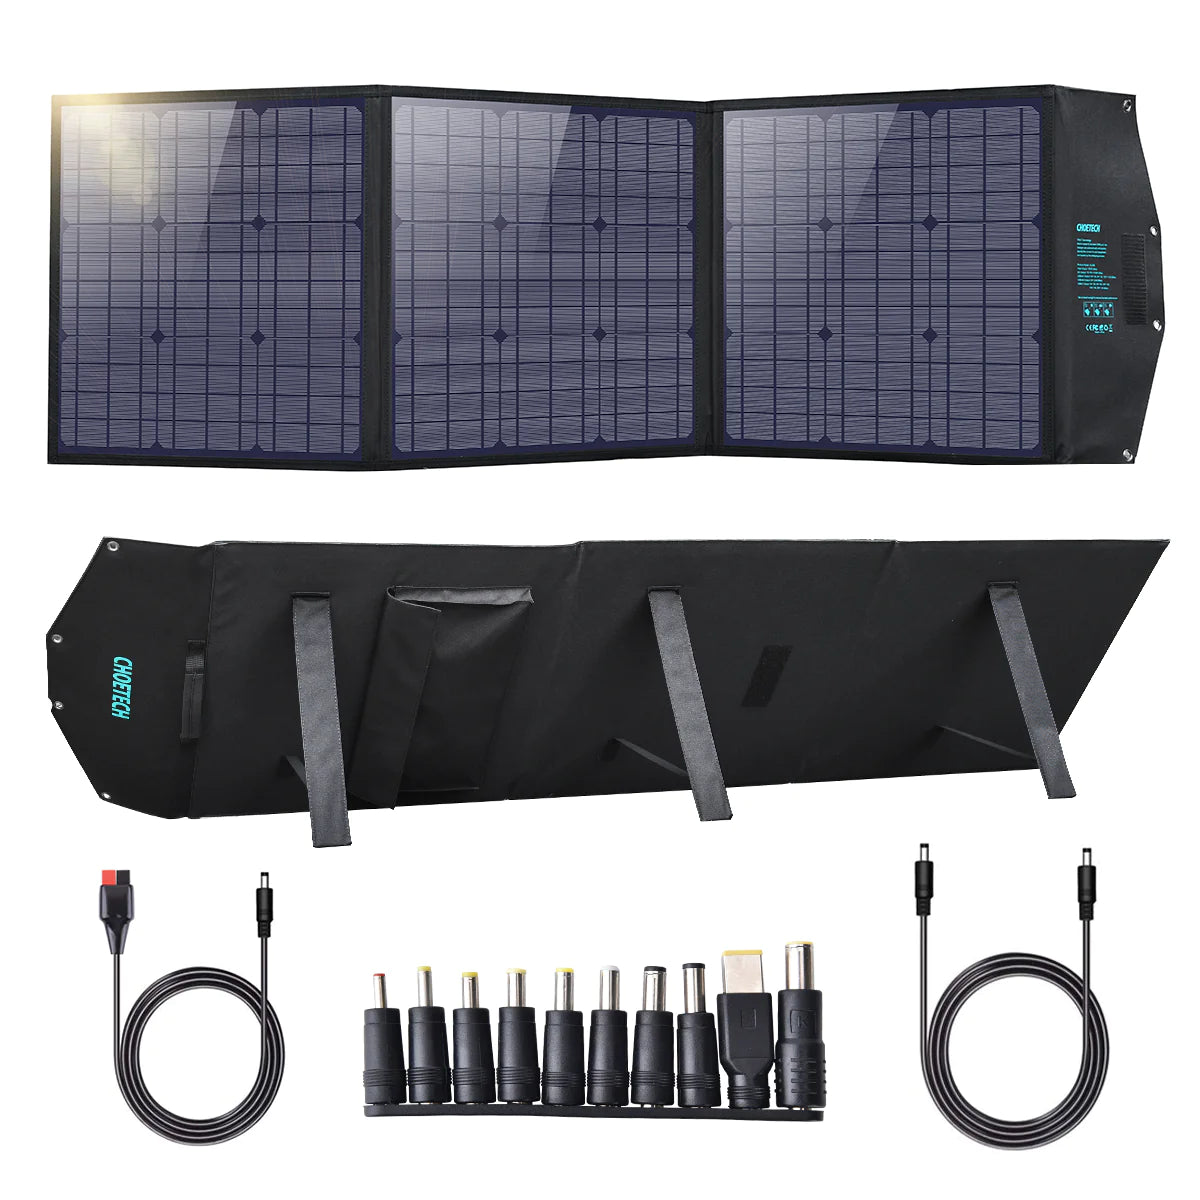 Choetech 120W Solar Panel Charger Portable 4 Output